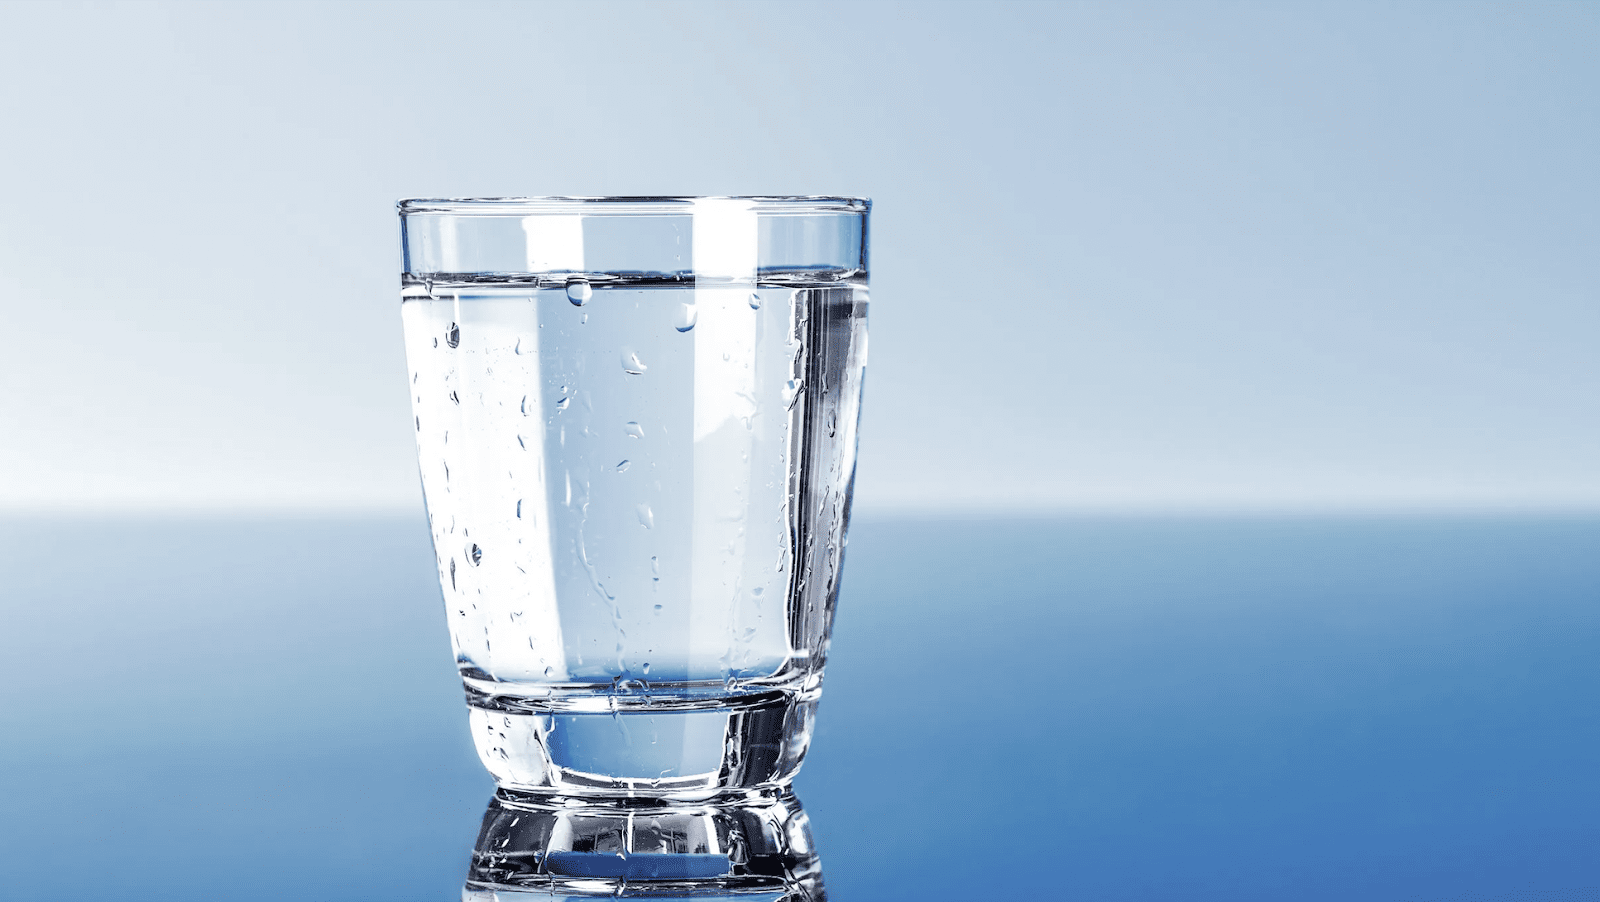 Full glass of water against a blue gradient background